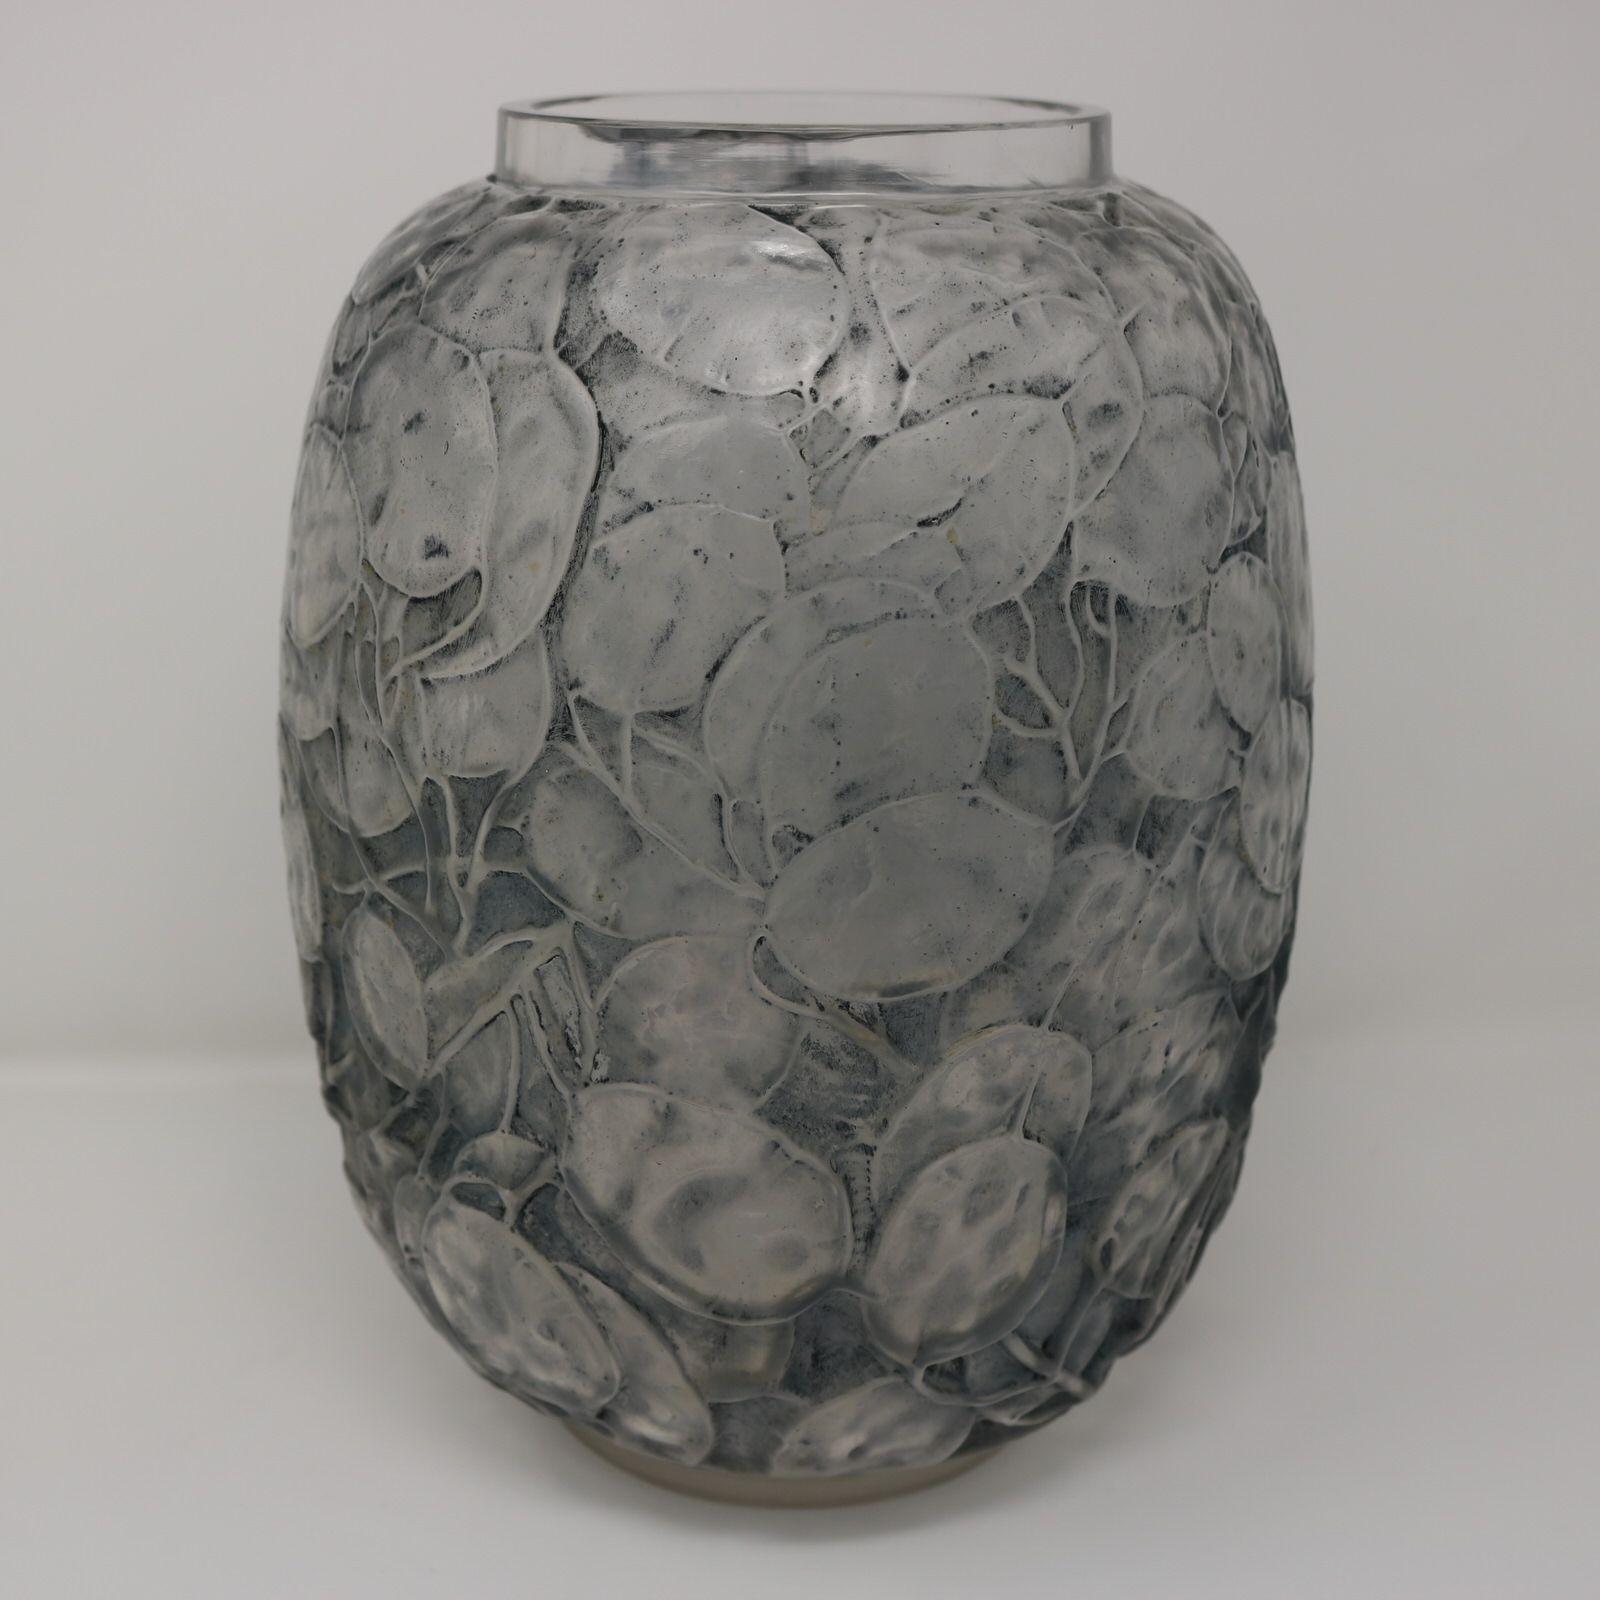 Rene Lalique clear and frosted glass 'Monnaie Du Pape' Vase. Blue stained details. This pattern features the Honesty plant, around the sides. (Monnaie du Pape literal translation is 'Pope's money' and is the french name for annual Honesty) Moulded